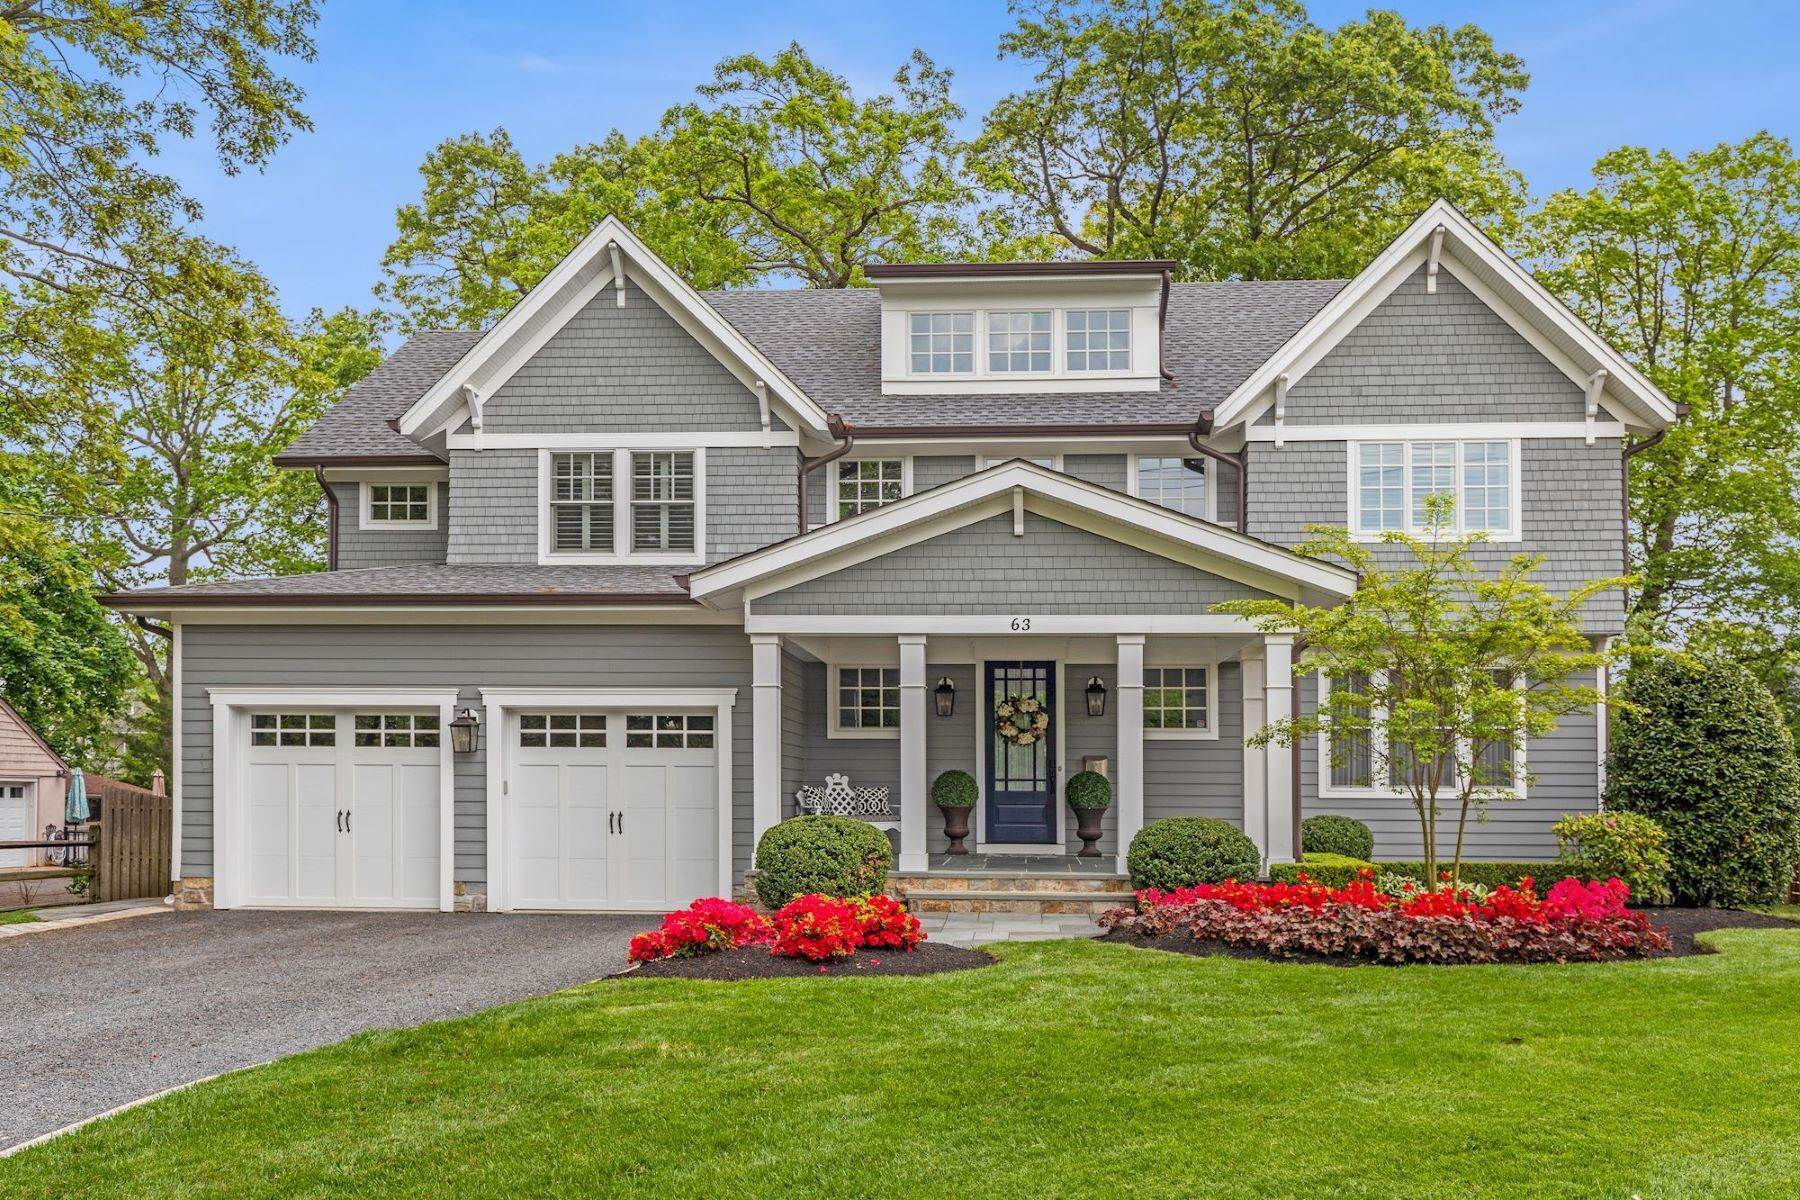 Single Family Homes for Sale at Magnificent Shore Colonial in the Heart of Rumson 63 Bingham Ave Rumson, New Jersey 07760 United States